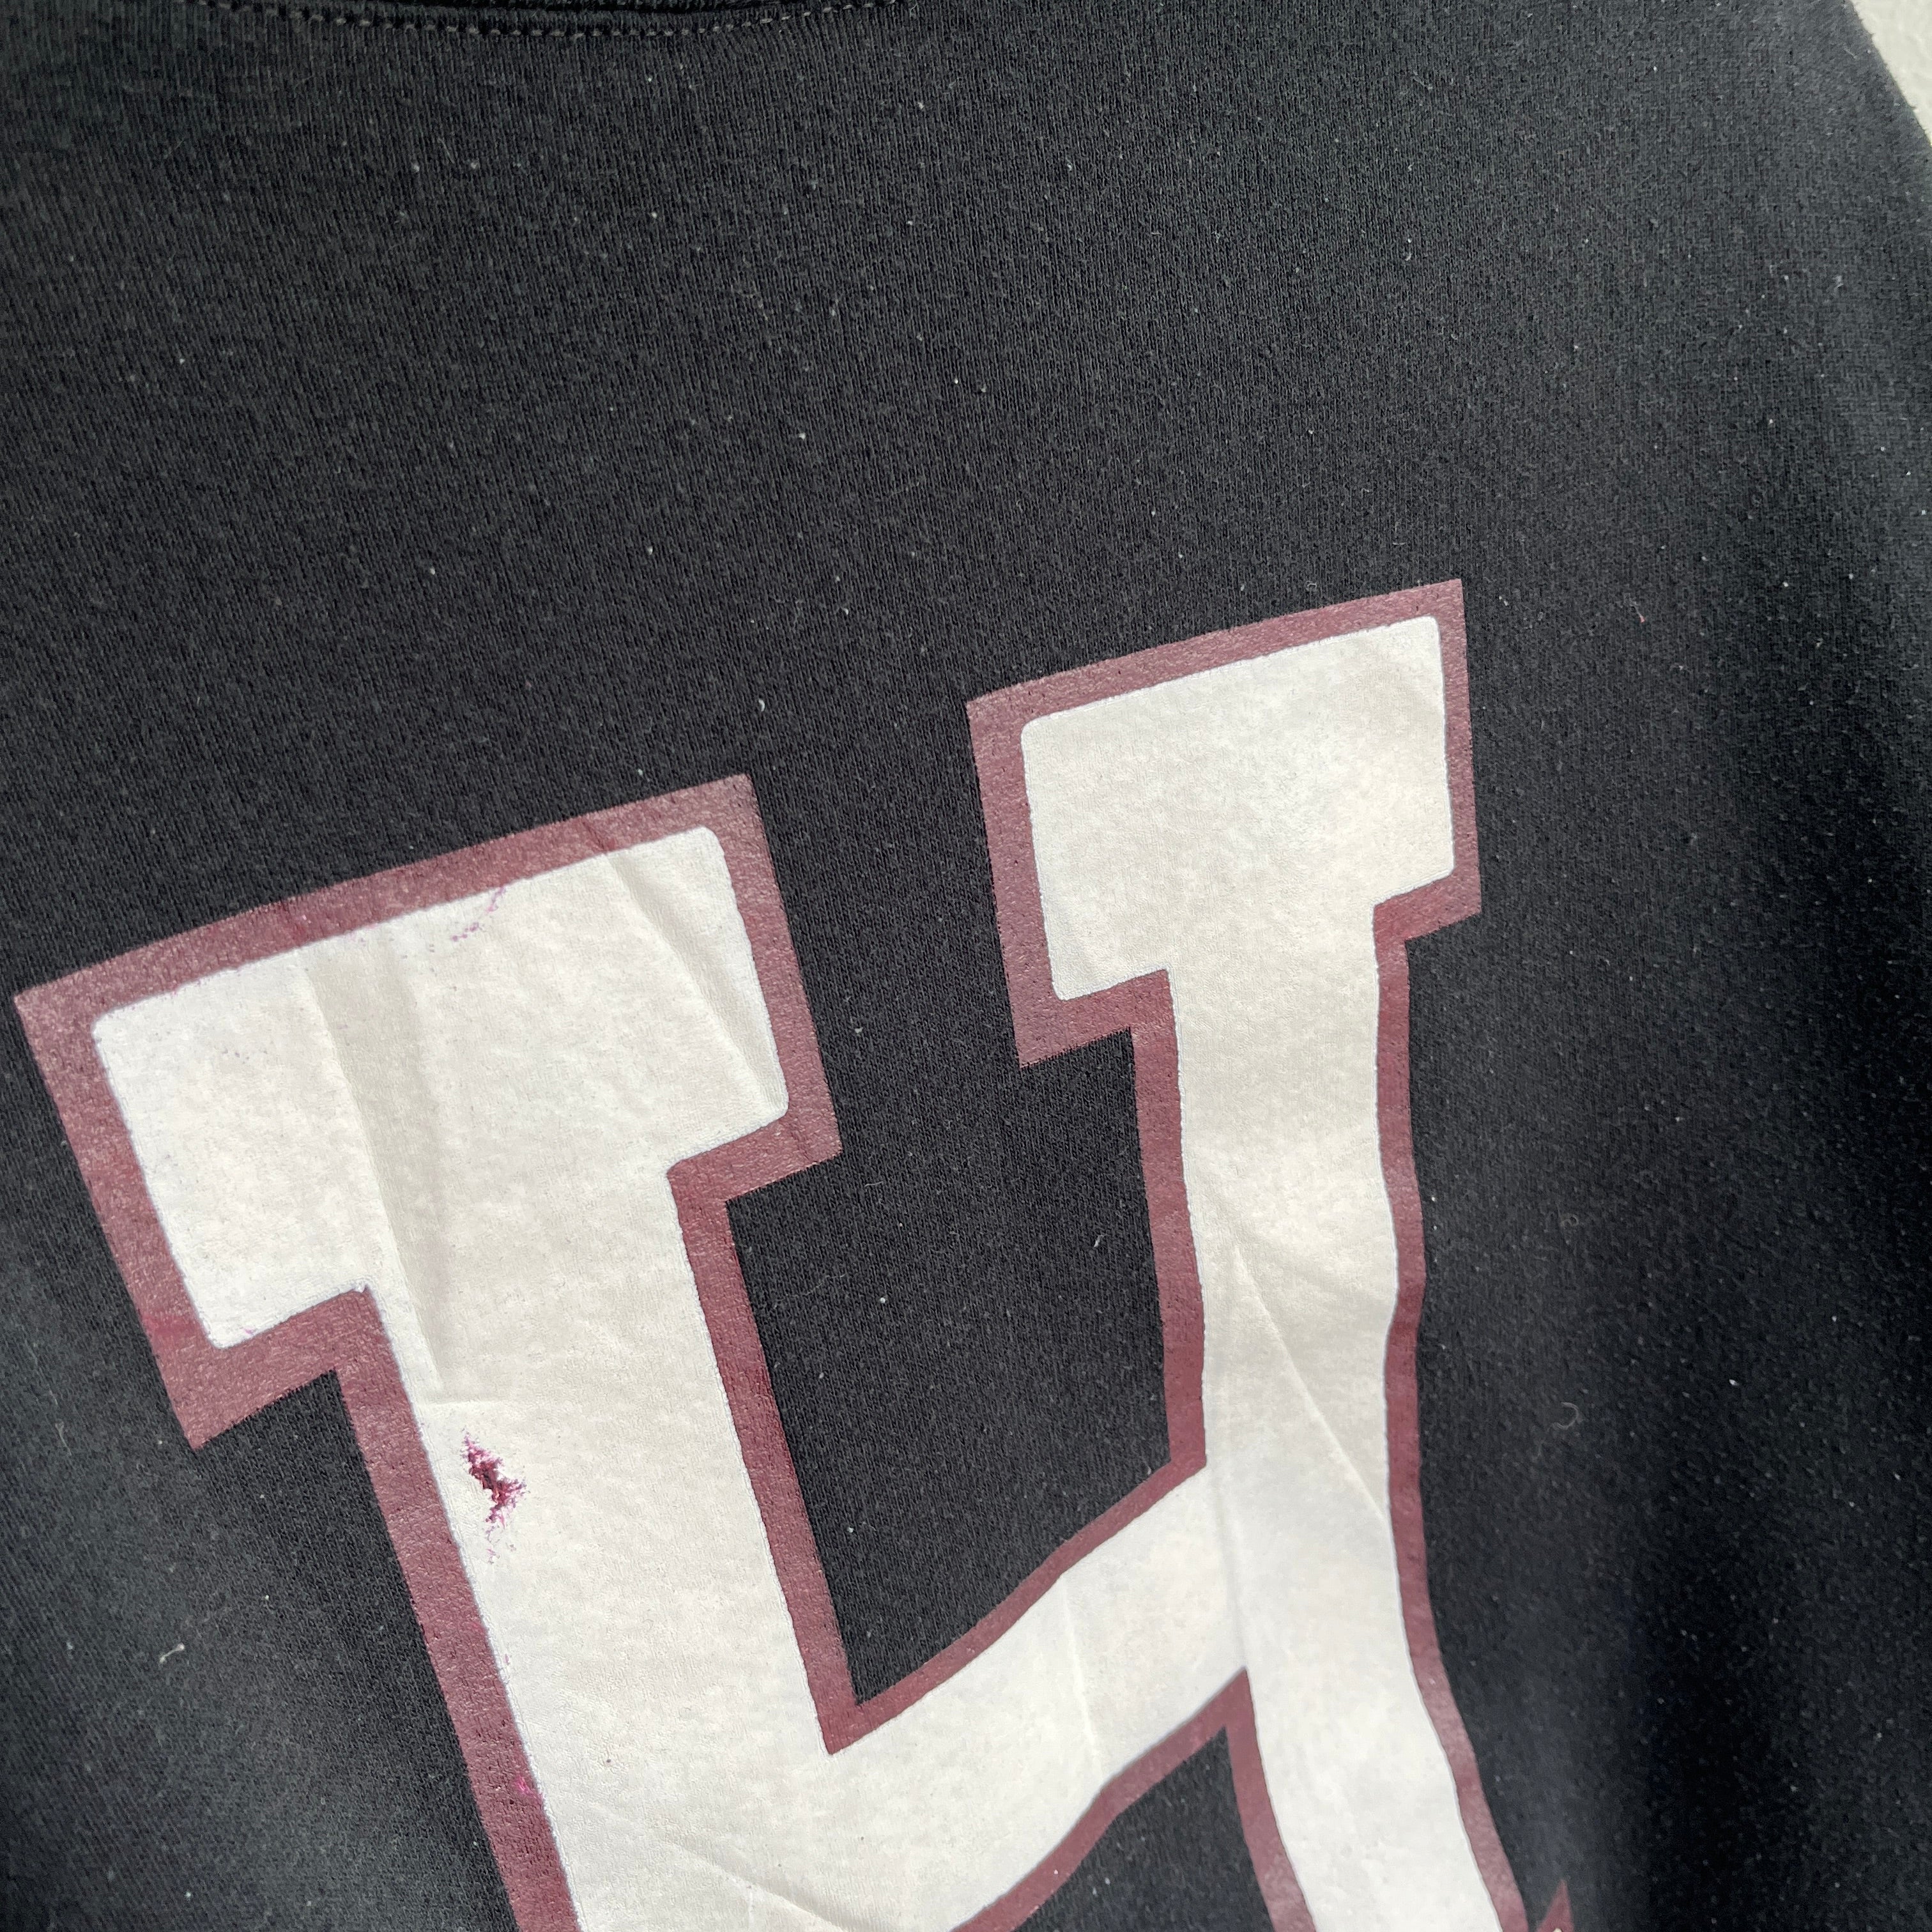 1990s Harvard Swimming and Diving Sweatshirt by Russell